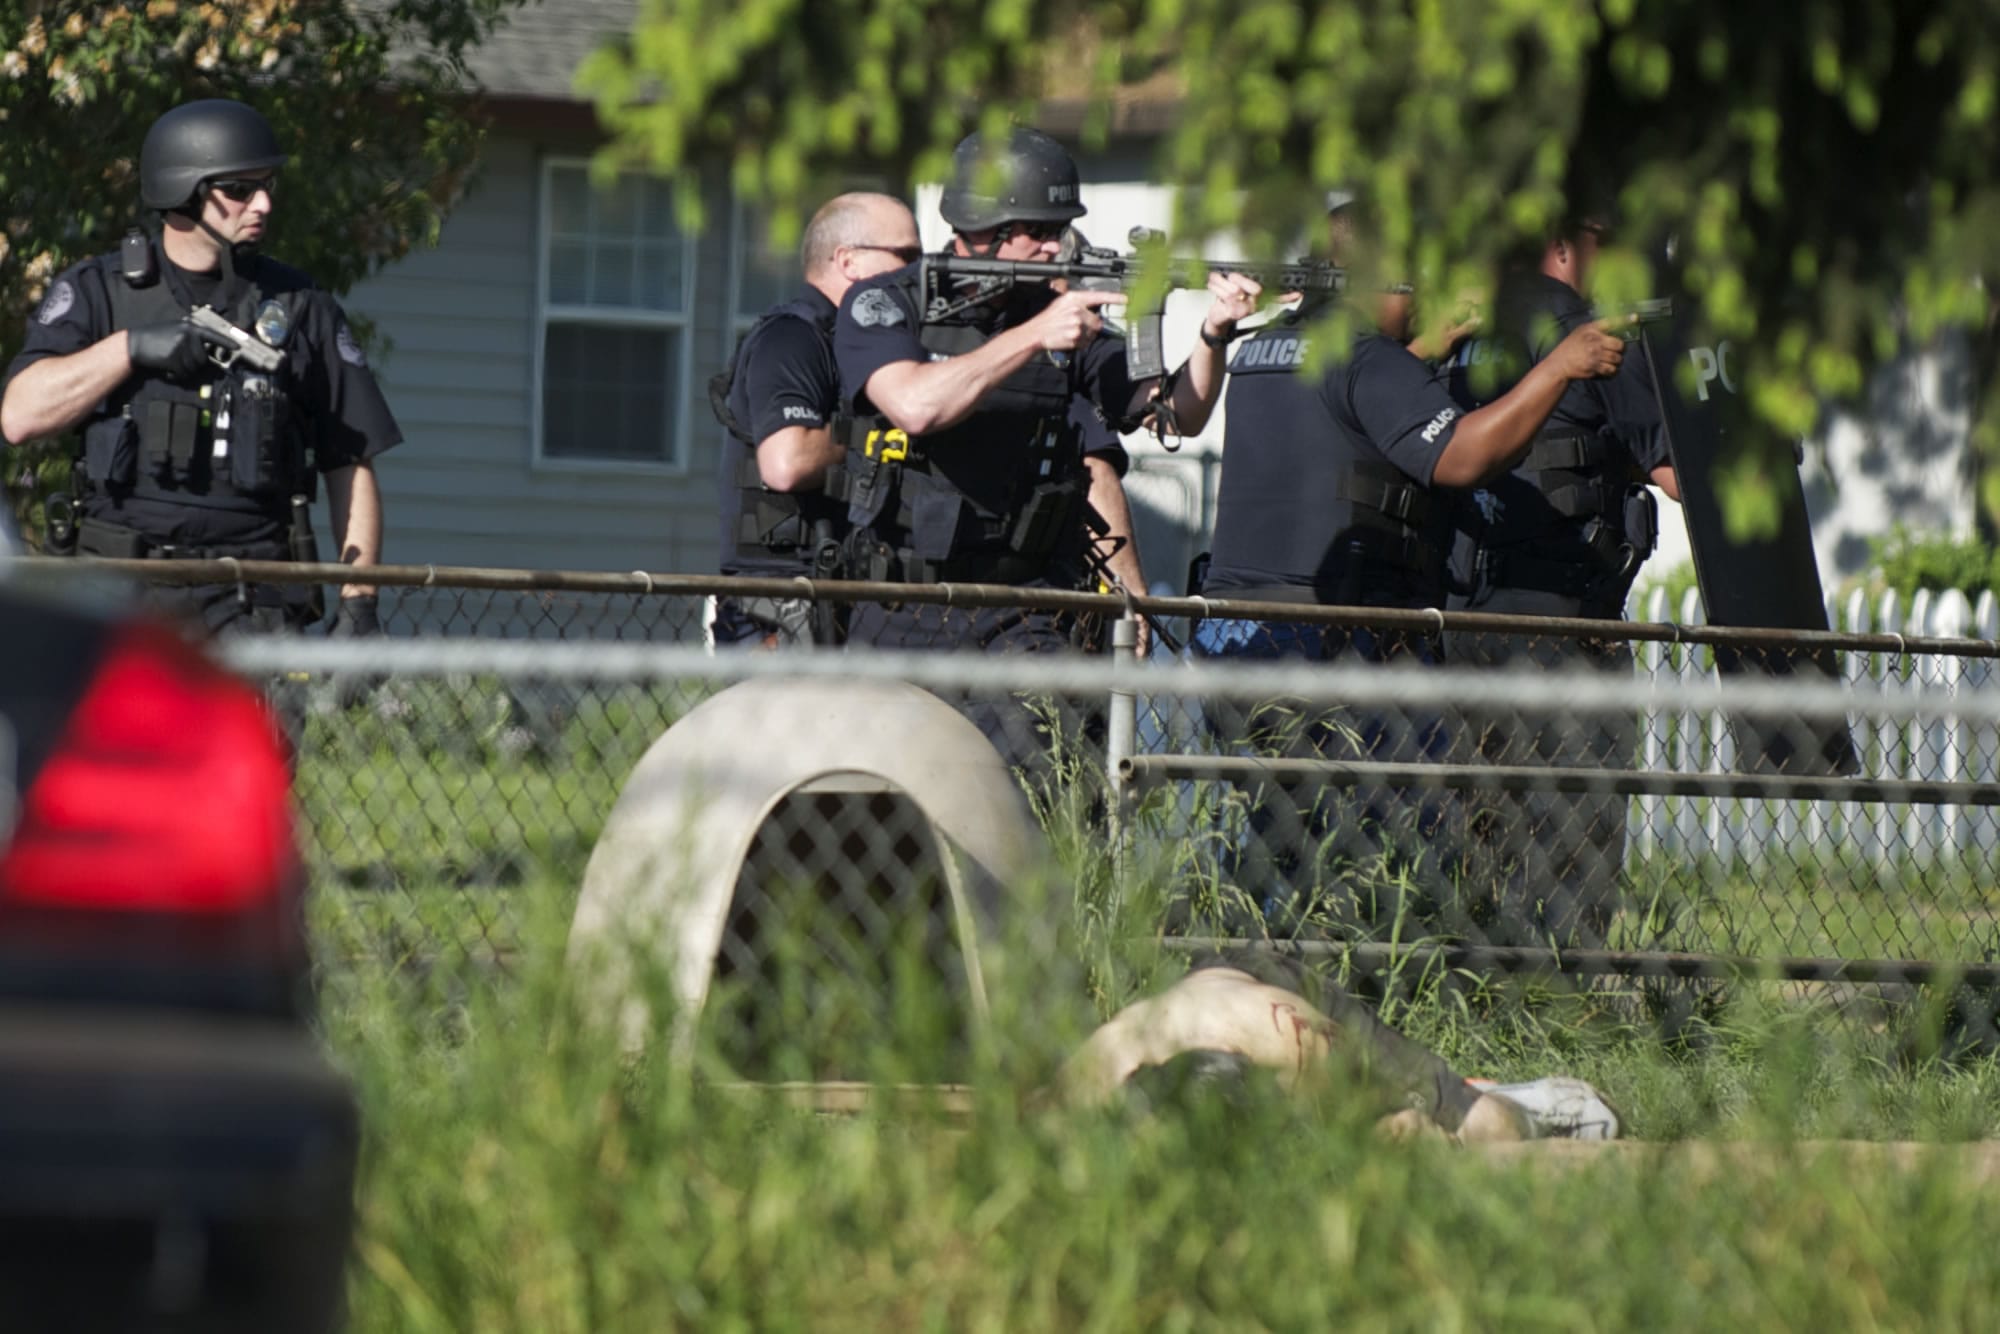 Police officers move in, weapons drawn and deploying a shield, to secure a shooting scene enough to allow medics to treat a man who'd been shot in the yard of a home in the Fruit Valley neighborhood.